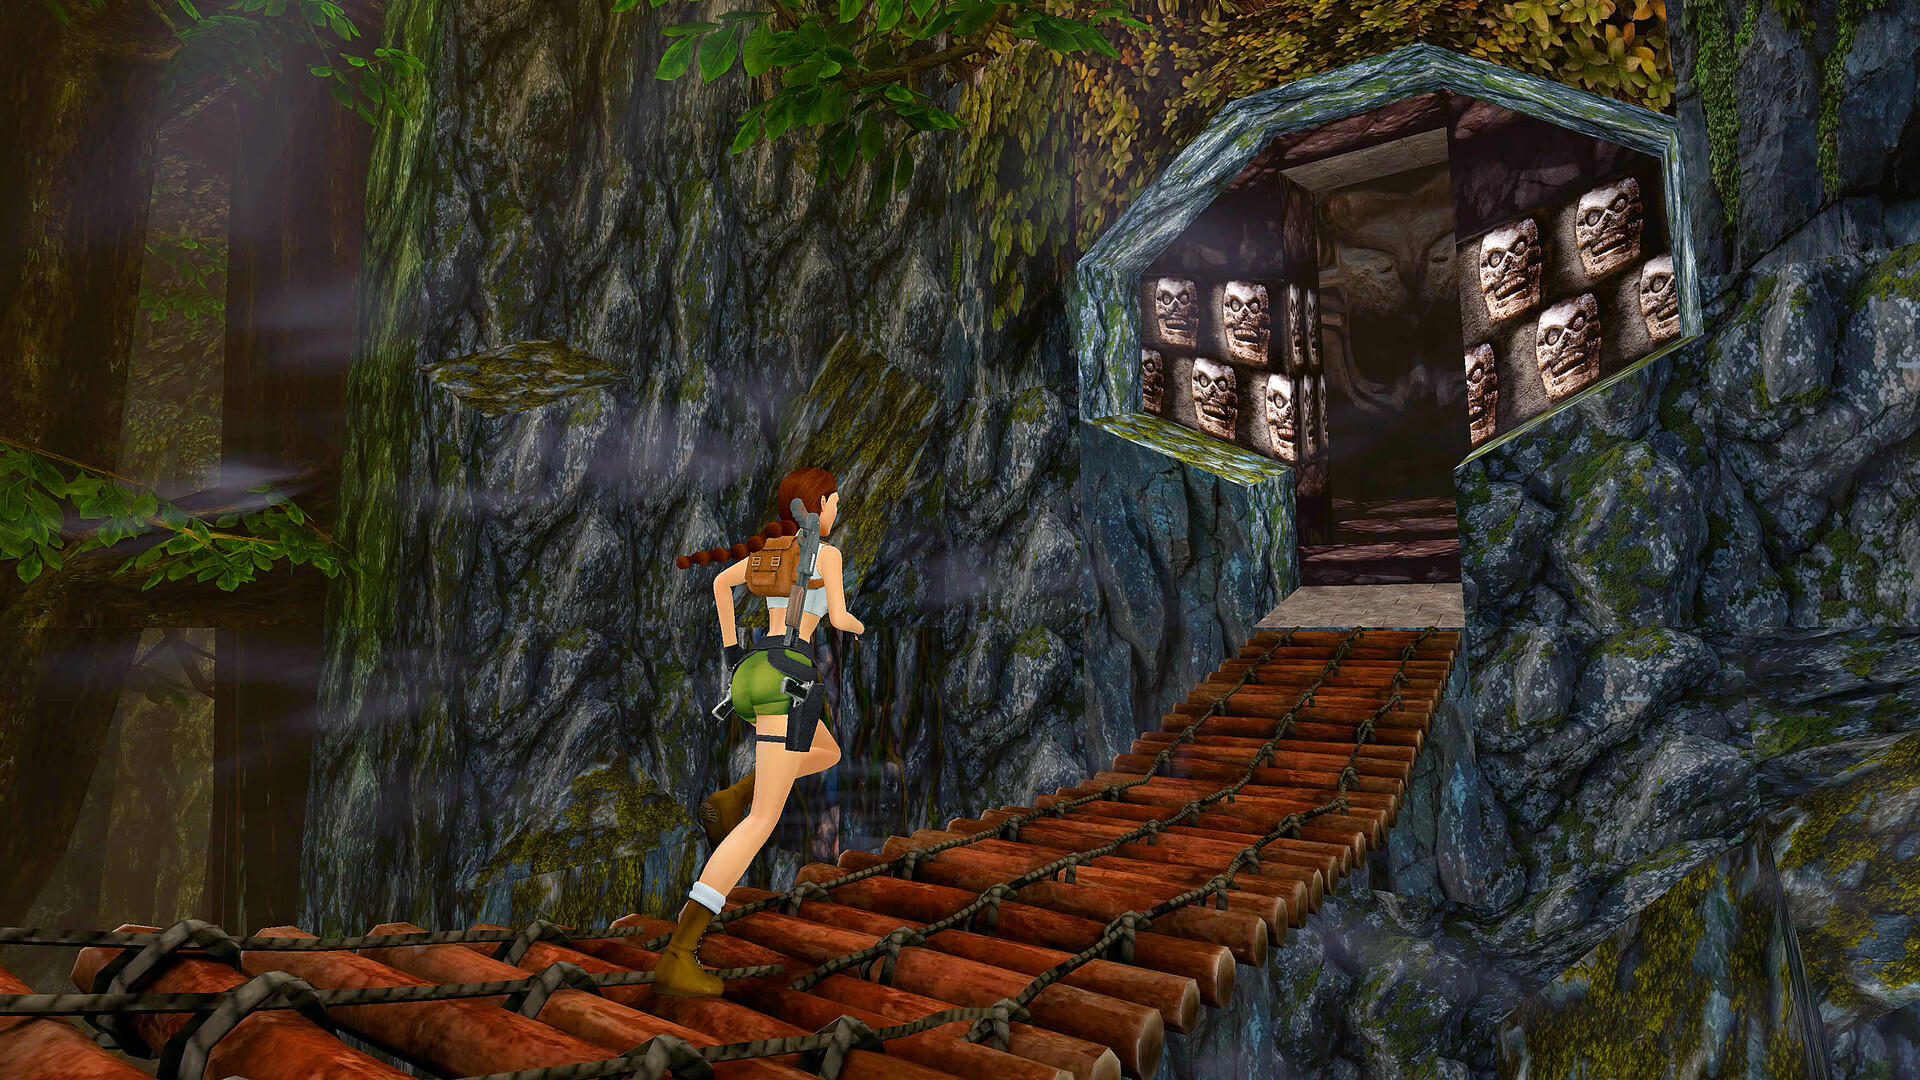 Tomb Raider I-III Remastered: Lara Croft's grand return available on PC and  consoles 